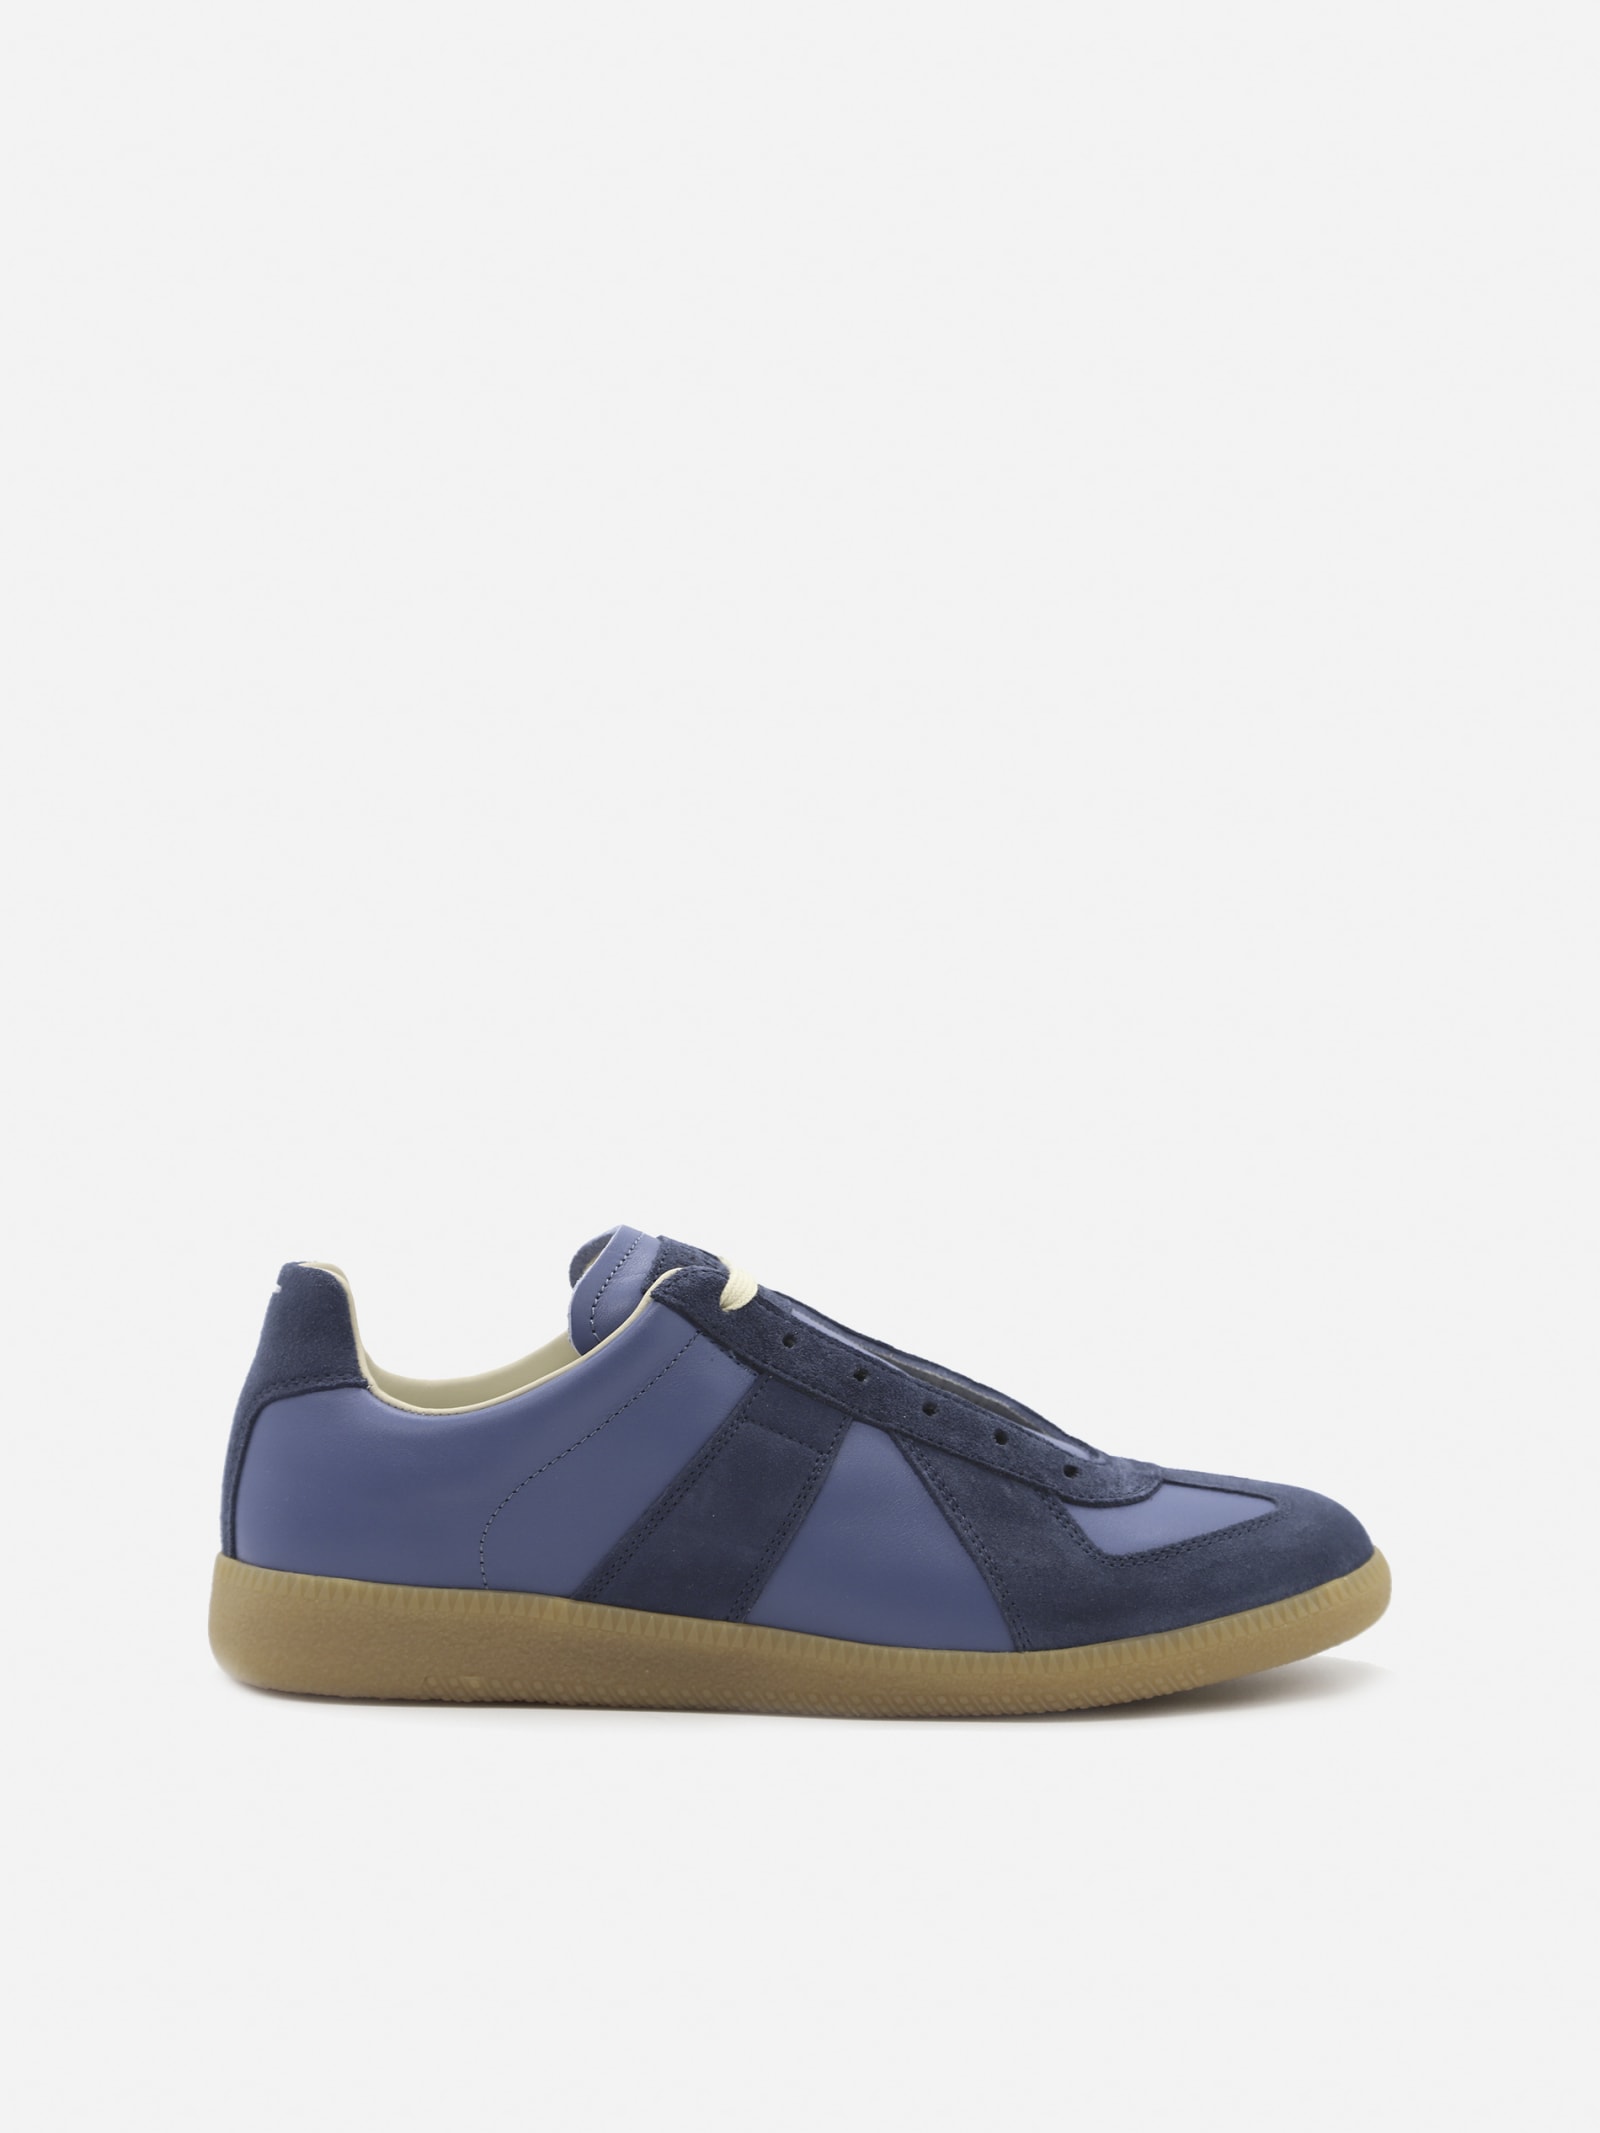 Maison Margiela replica leather sneakers with suede inserts